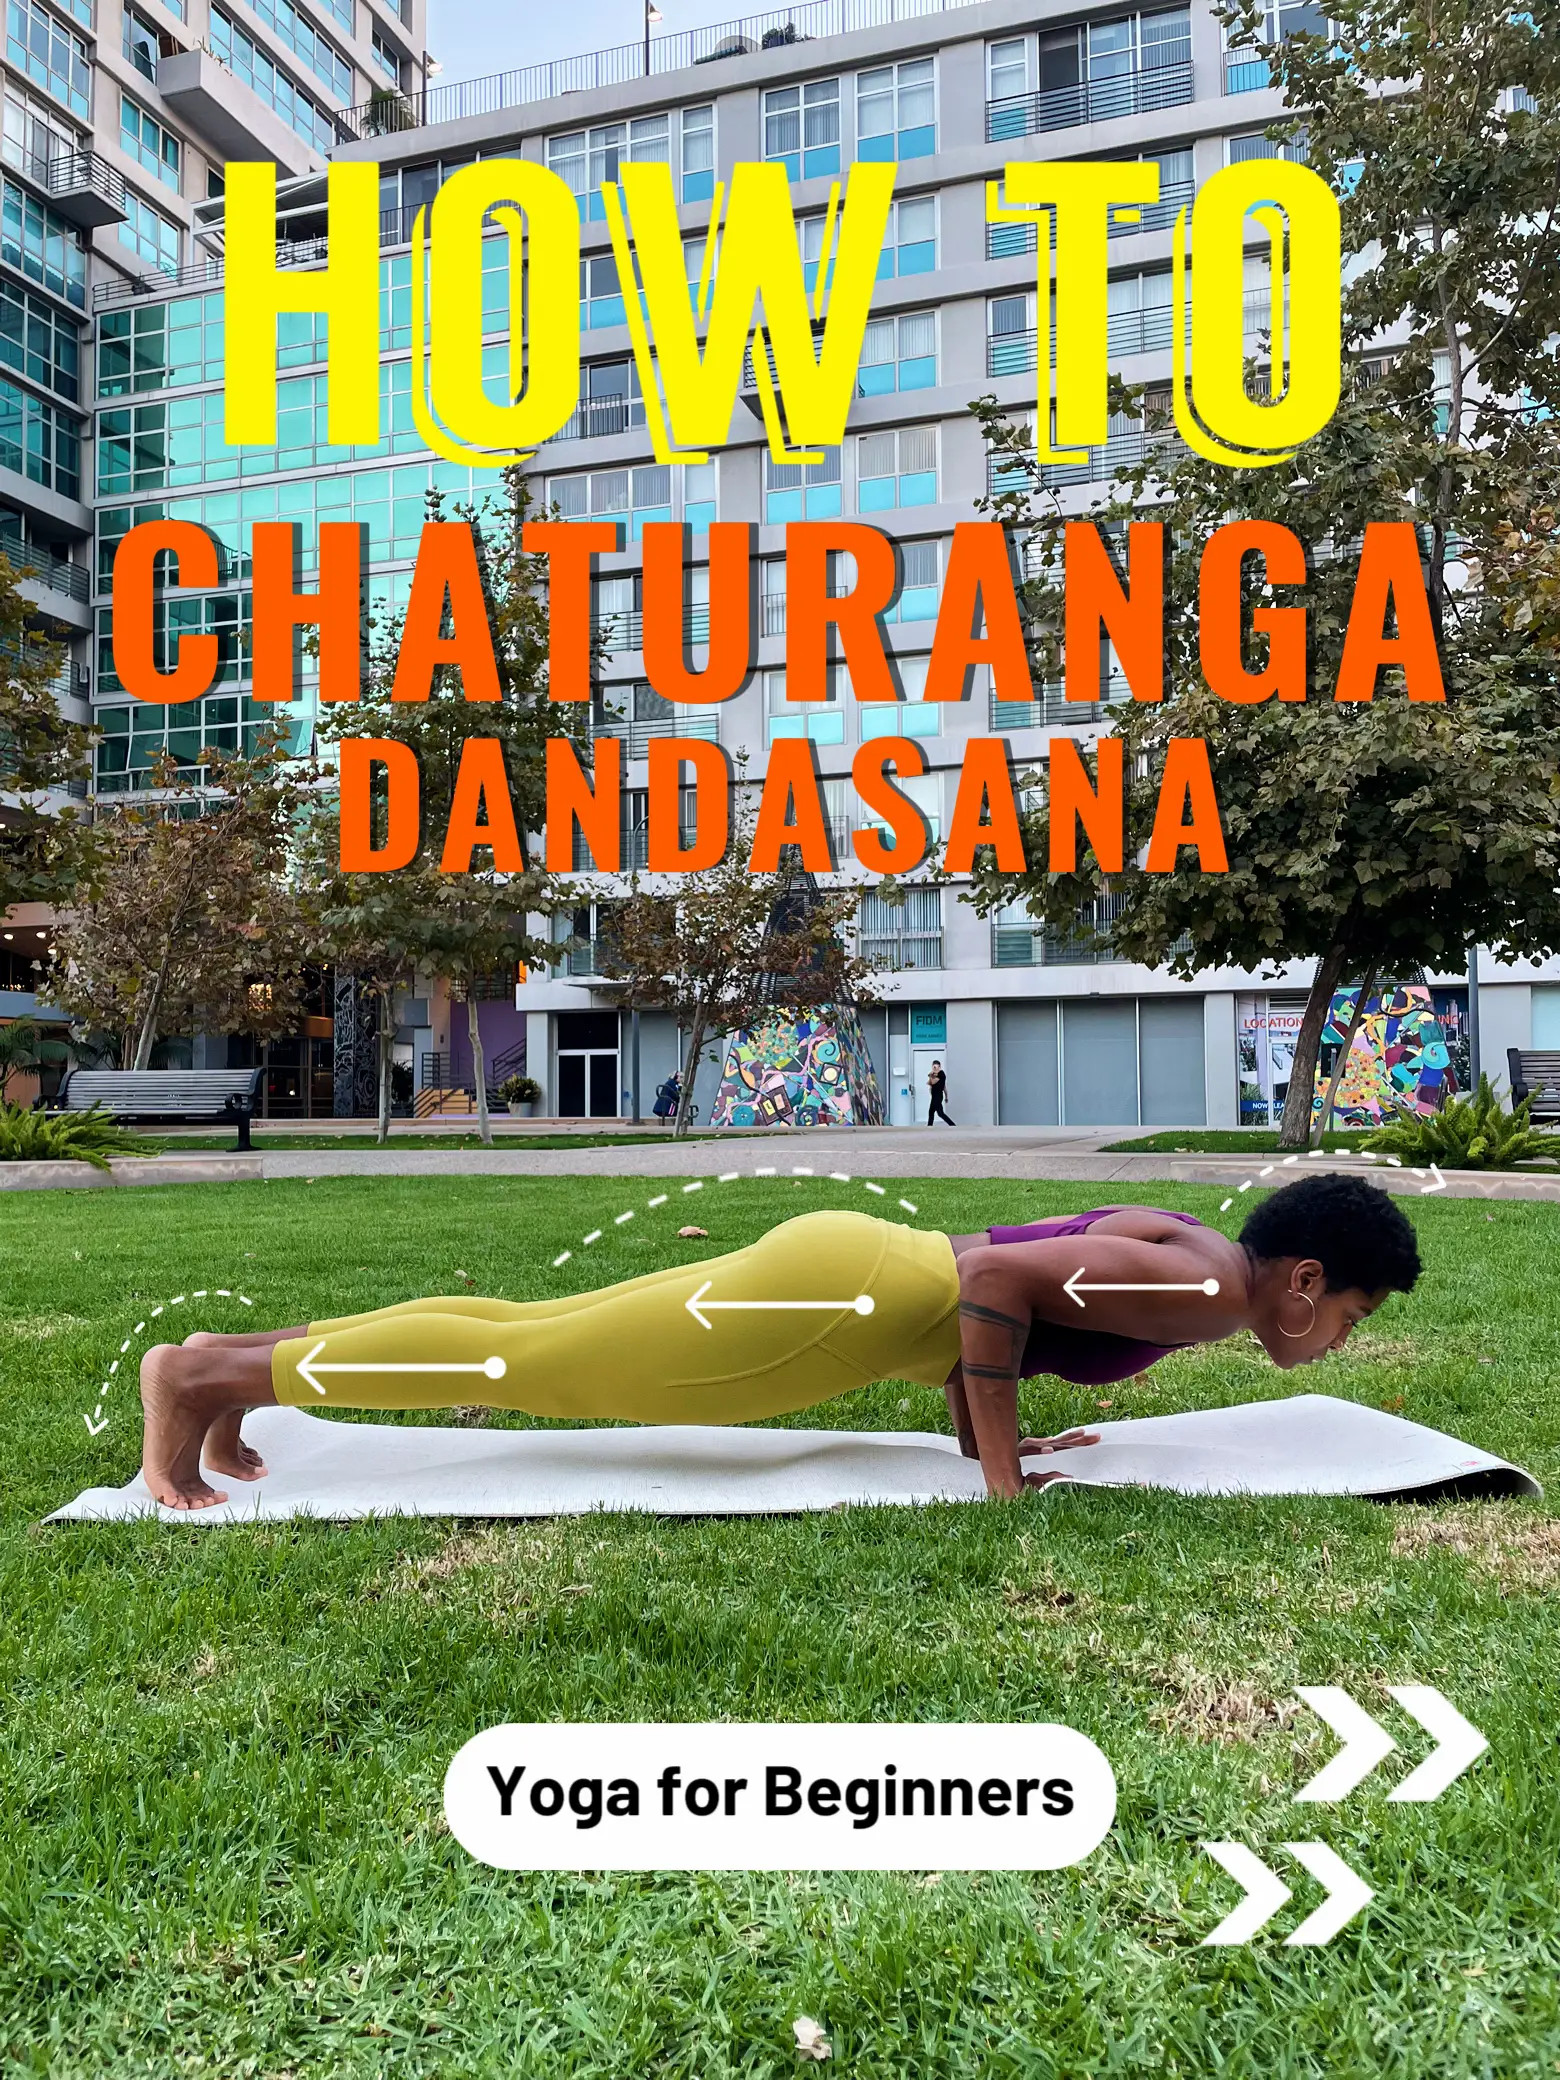 The Right Way To Do Chaturanga In Yoga Class